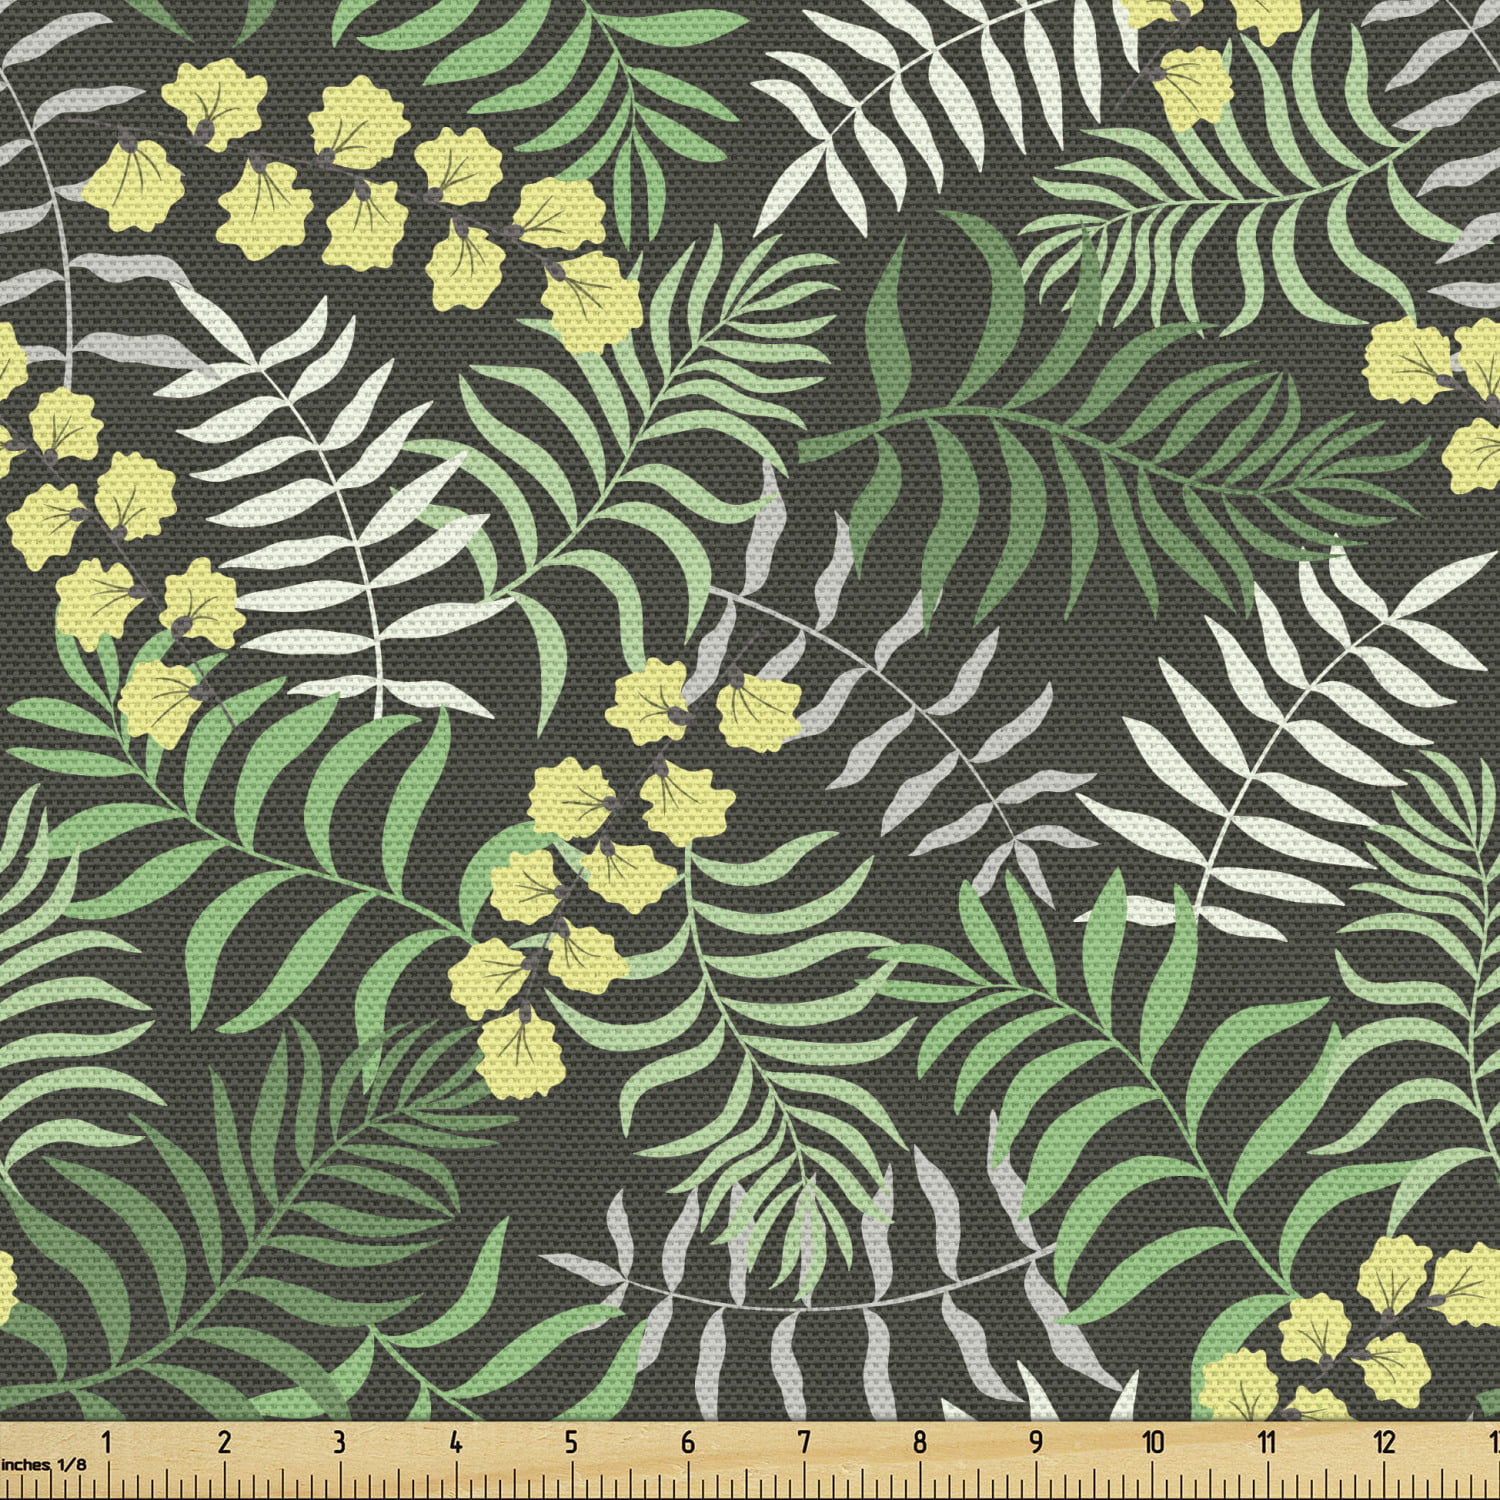 Botanical Fabric by the Yard, Tropical Flowers Flourishing in Jungle Fern Leaf Nature Growth Art Deco, Upholstery Fabric for Dining Chairs Home Decor Accents, Jade Green by Ambesonne - Walmart.com